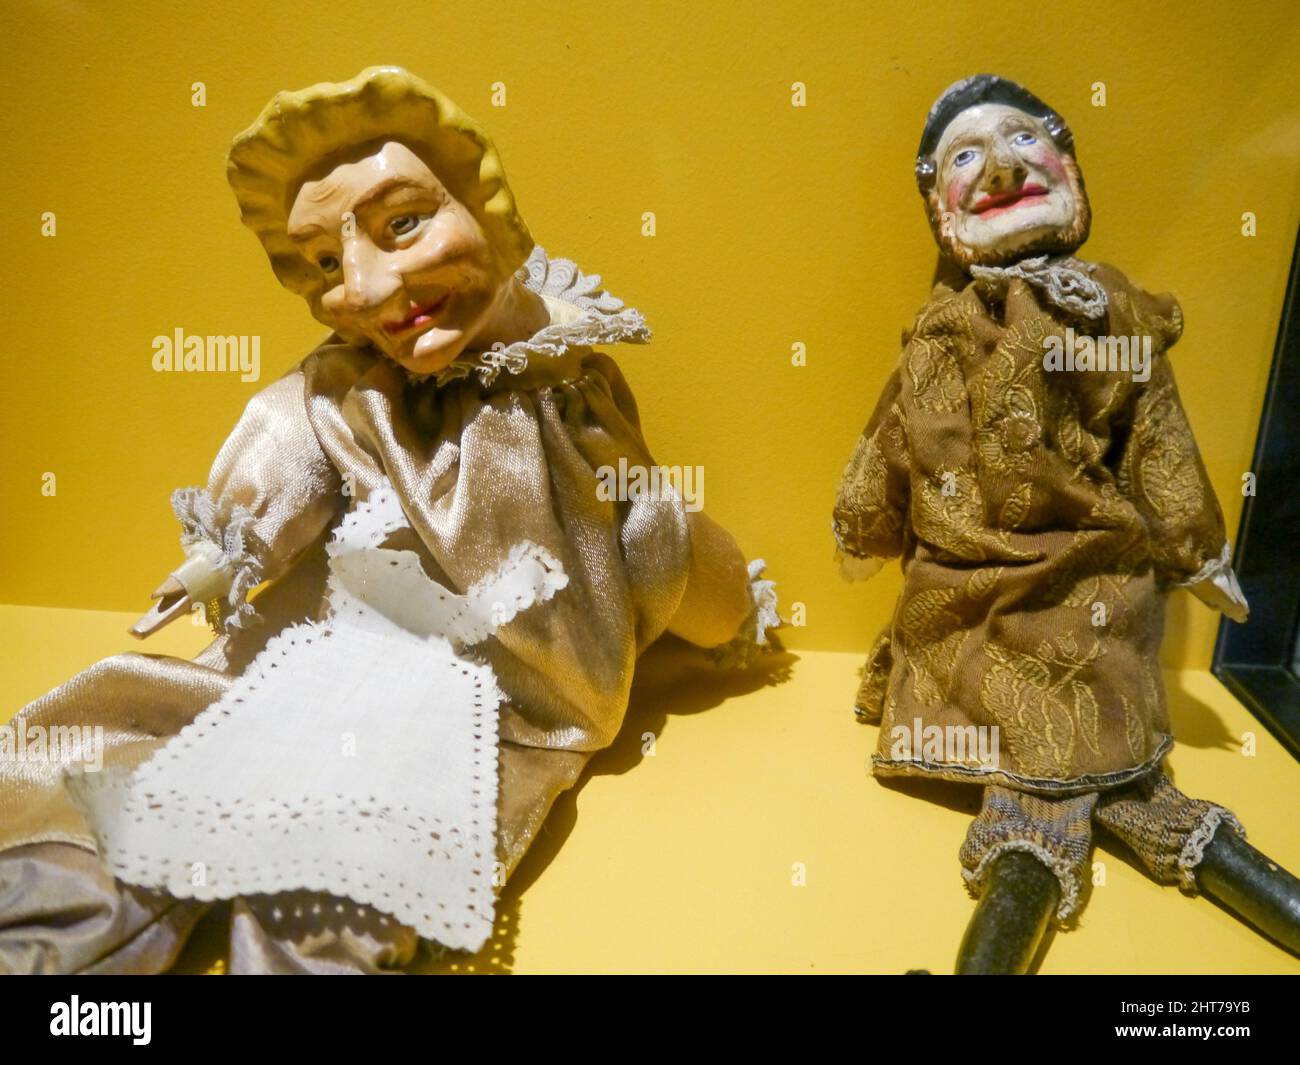 Victorian Punch and Judy puppets dating from the 1800's. Punch and Judy was a popular puppet show that often took place at British seaside resorts. Stock Photo